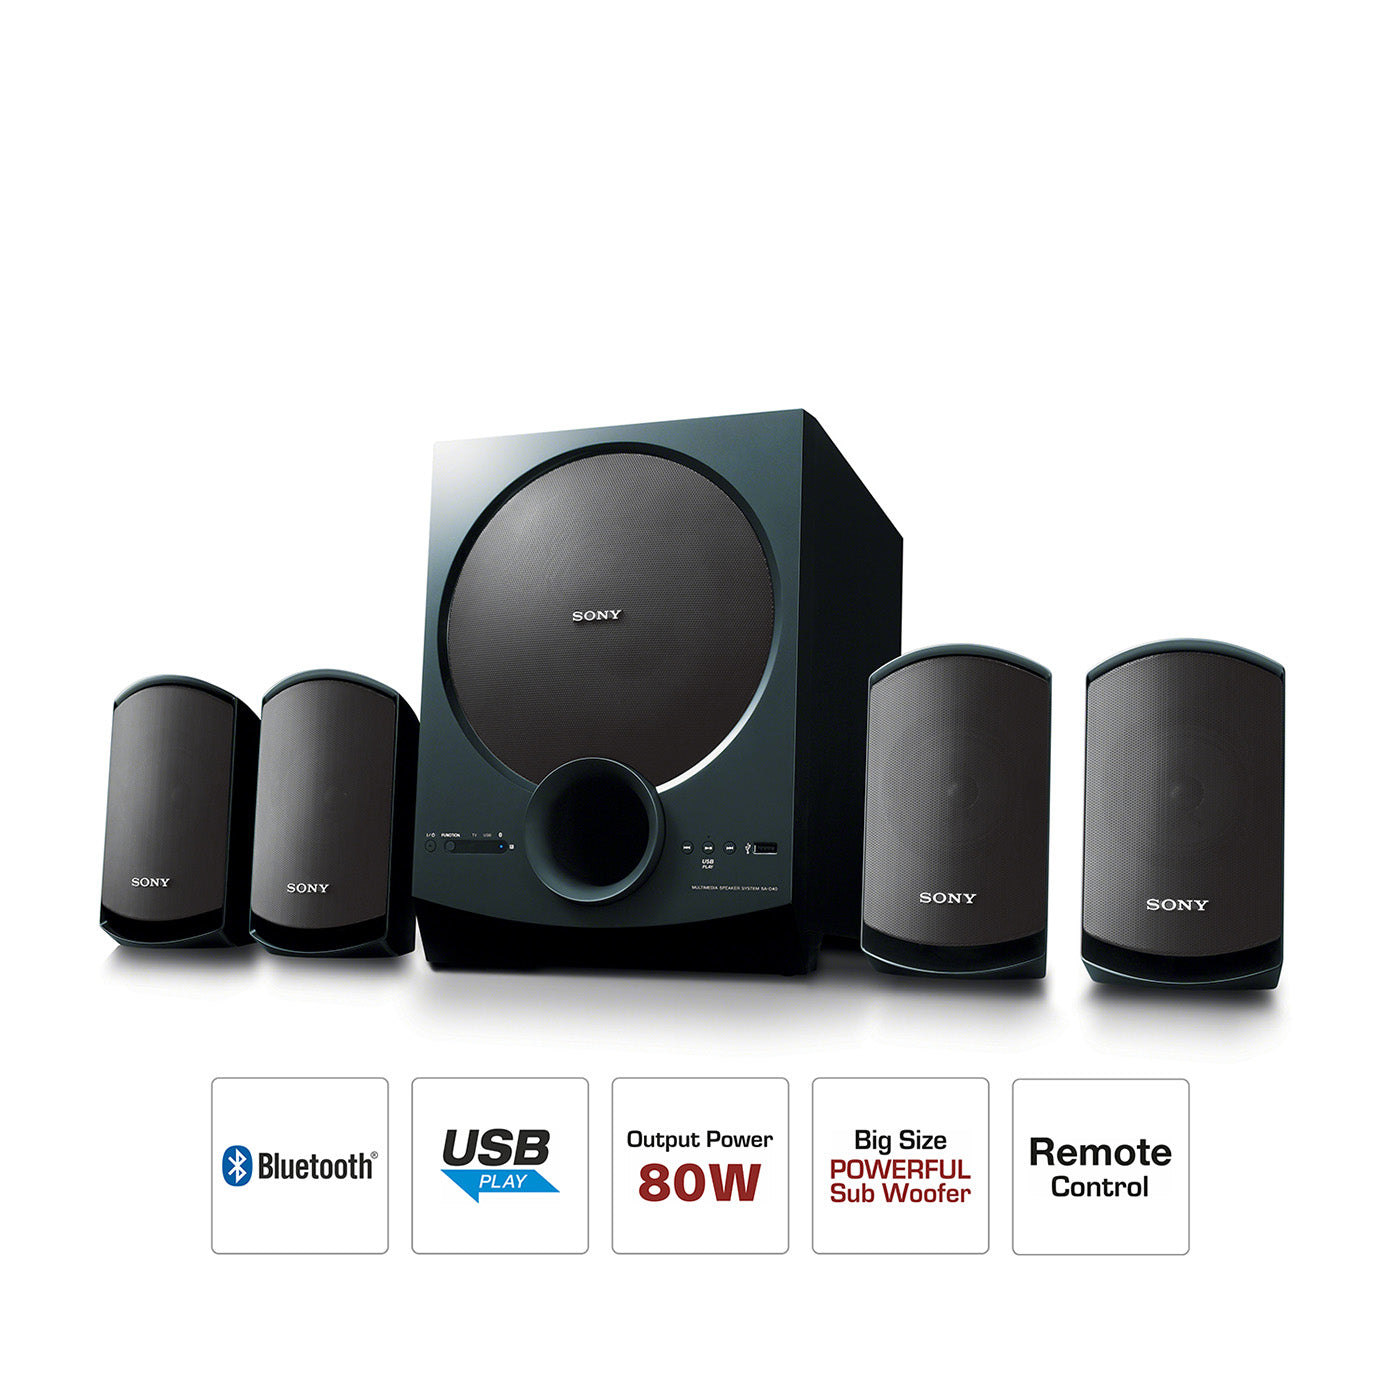 Sony SA-D40 C E12 4.1 Channel Multimedia Speaker System with Bluetooth (Black)